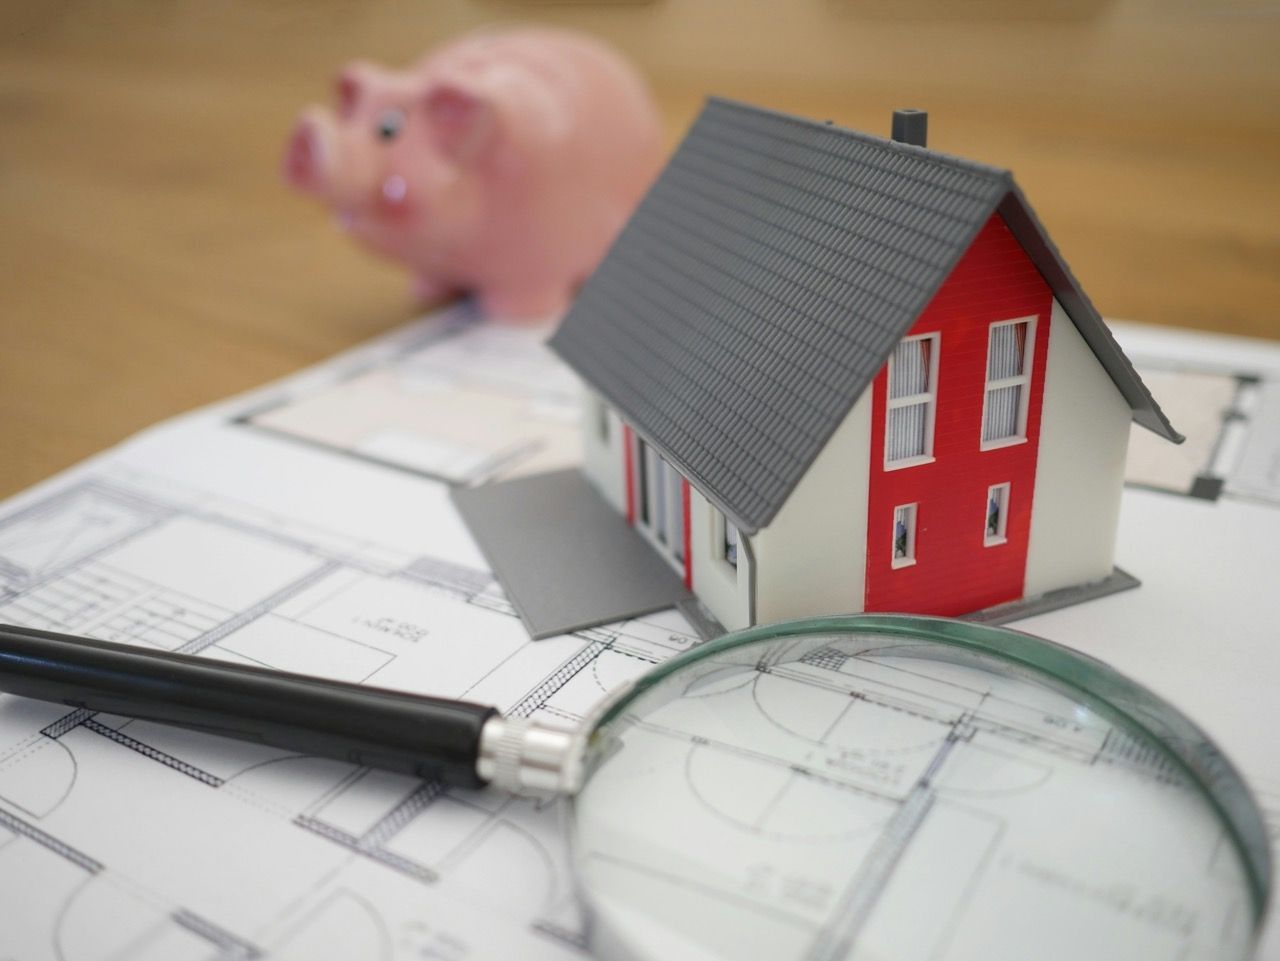 A red miniature house model is placed atop house blueprints with a black pen and a magnifying glass.